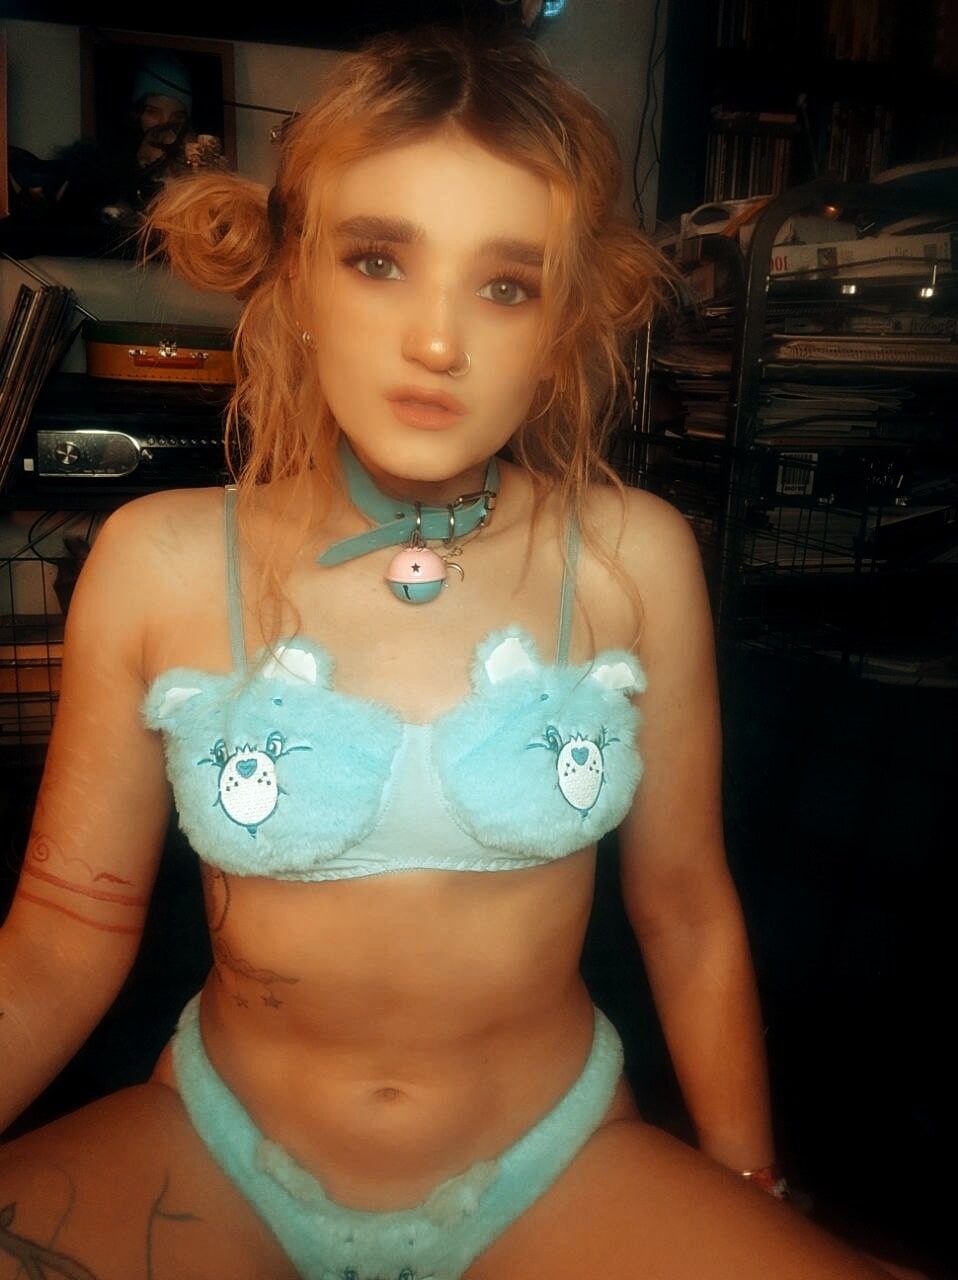 I'm blue care bear that's the care bear of the night & moon #17